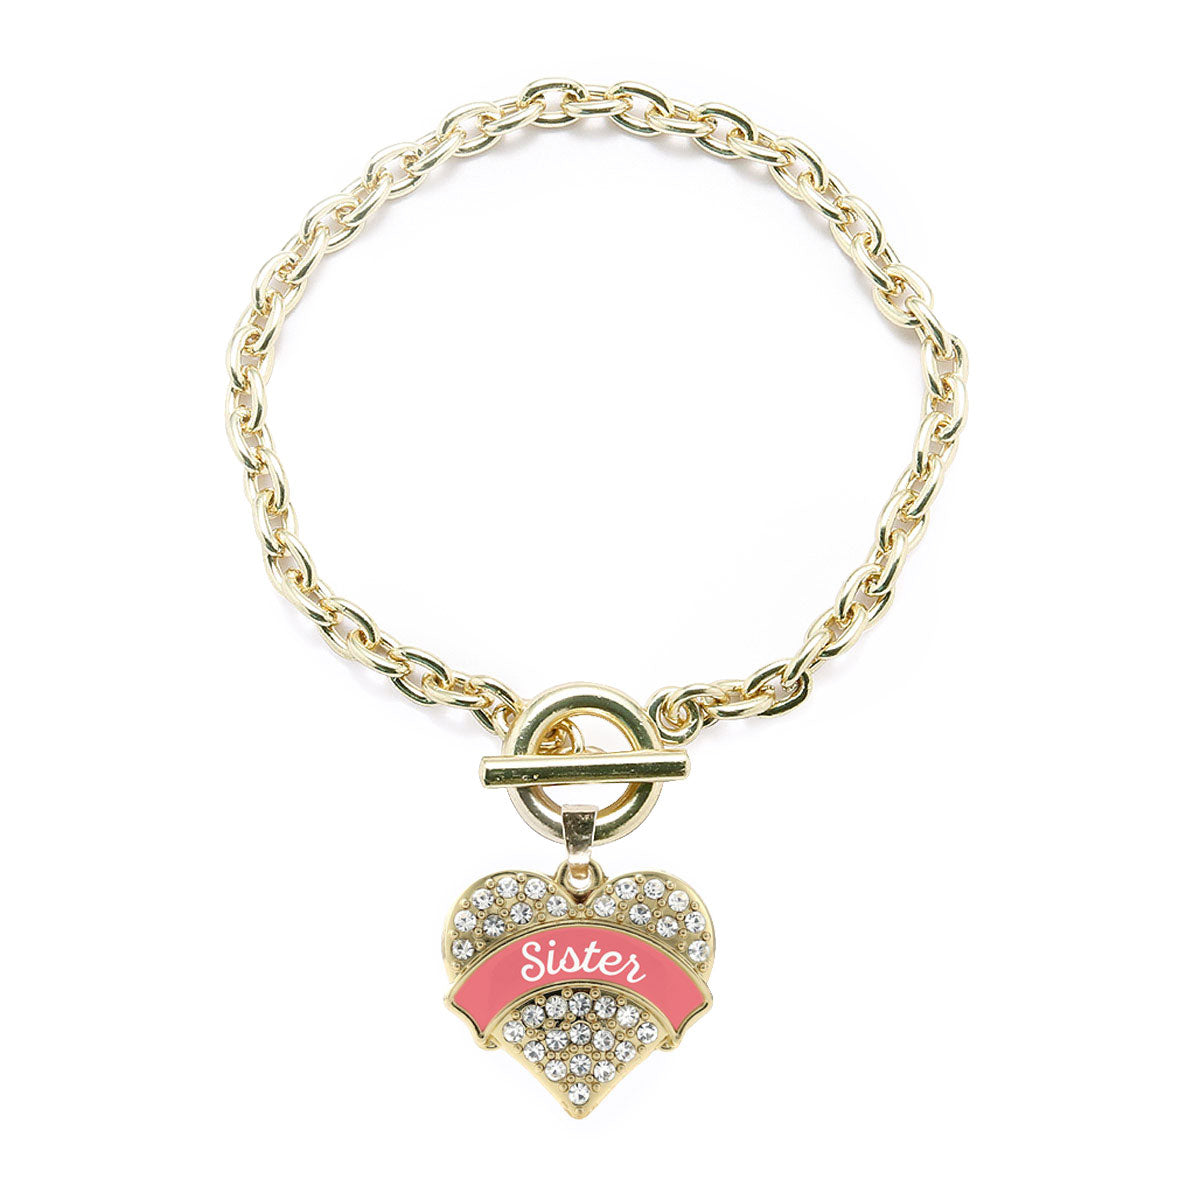 Gold Coral Sister Pave Heart Charm Toggle Bracelet